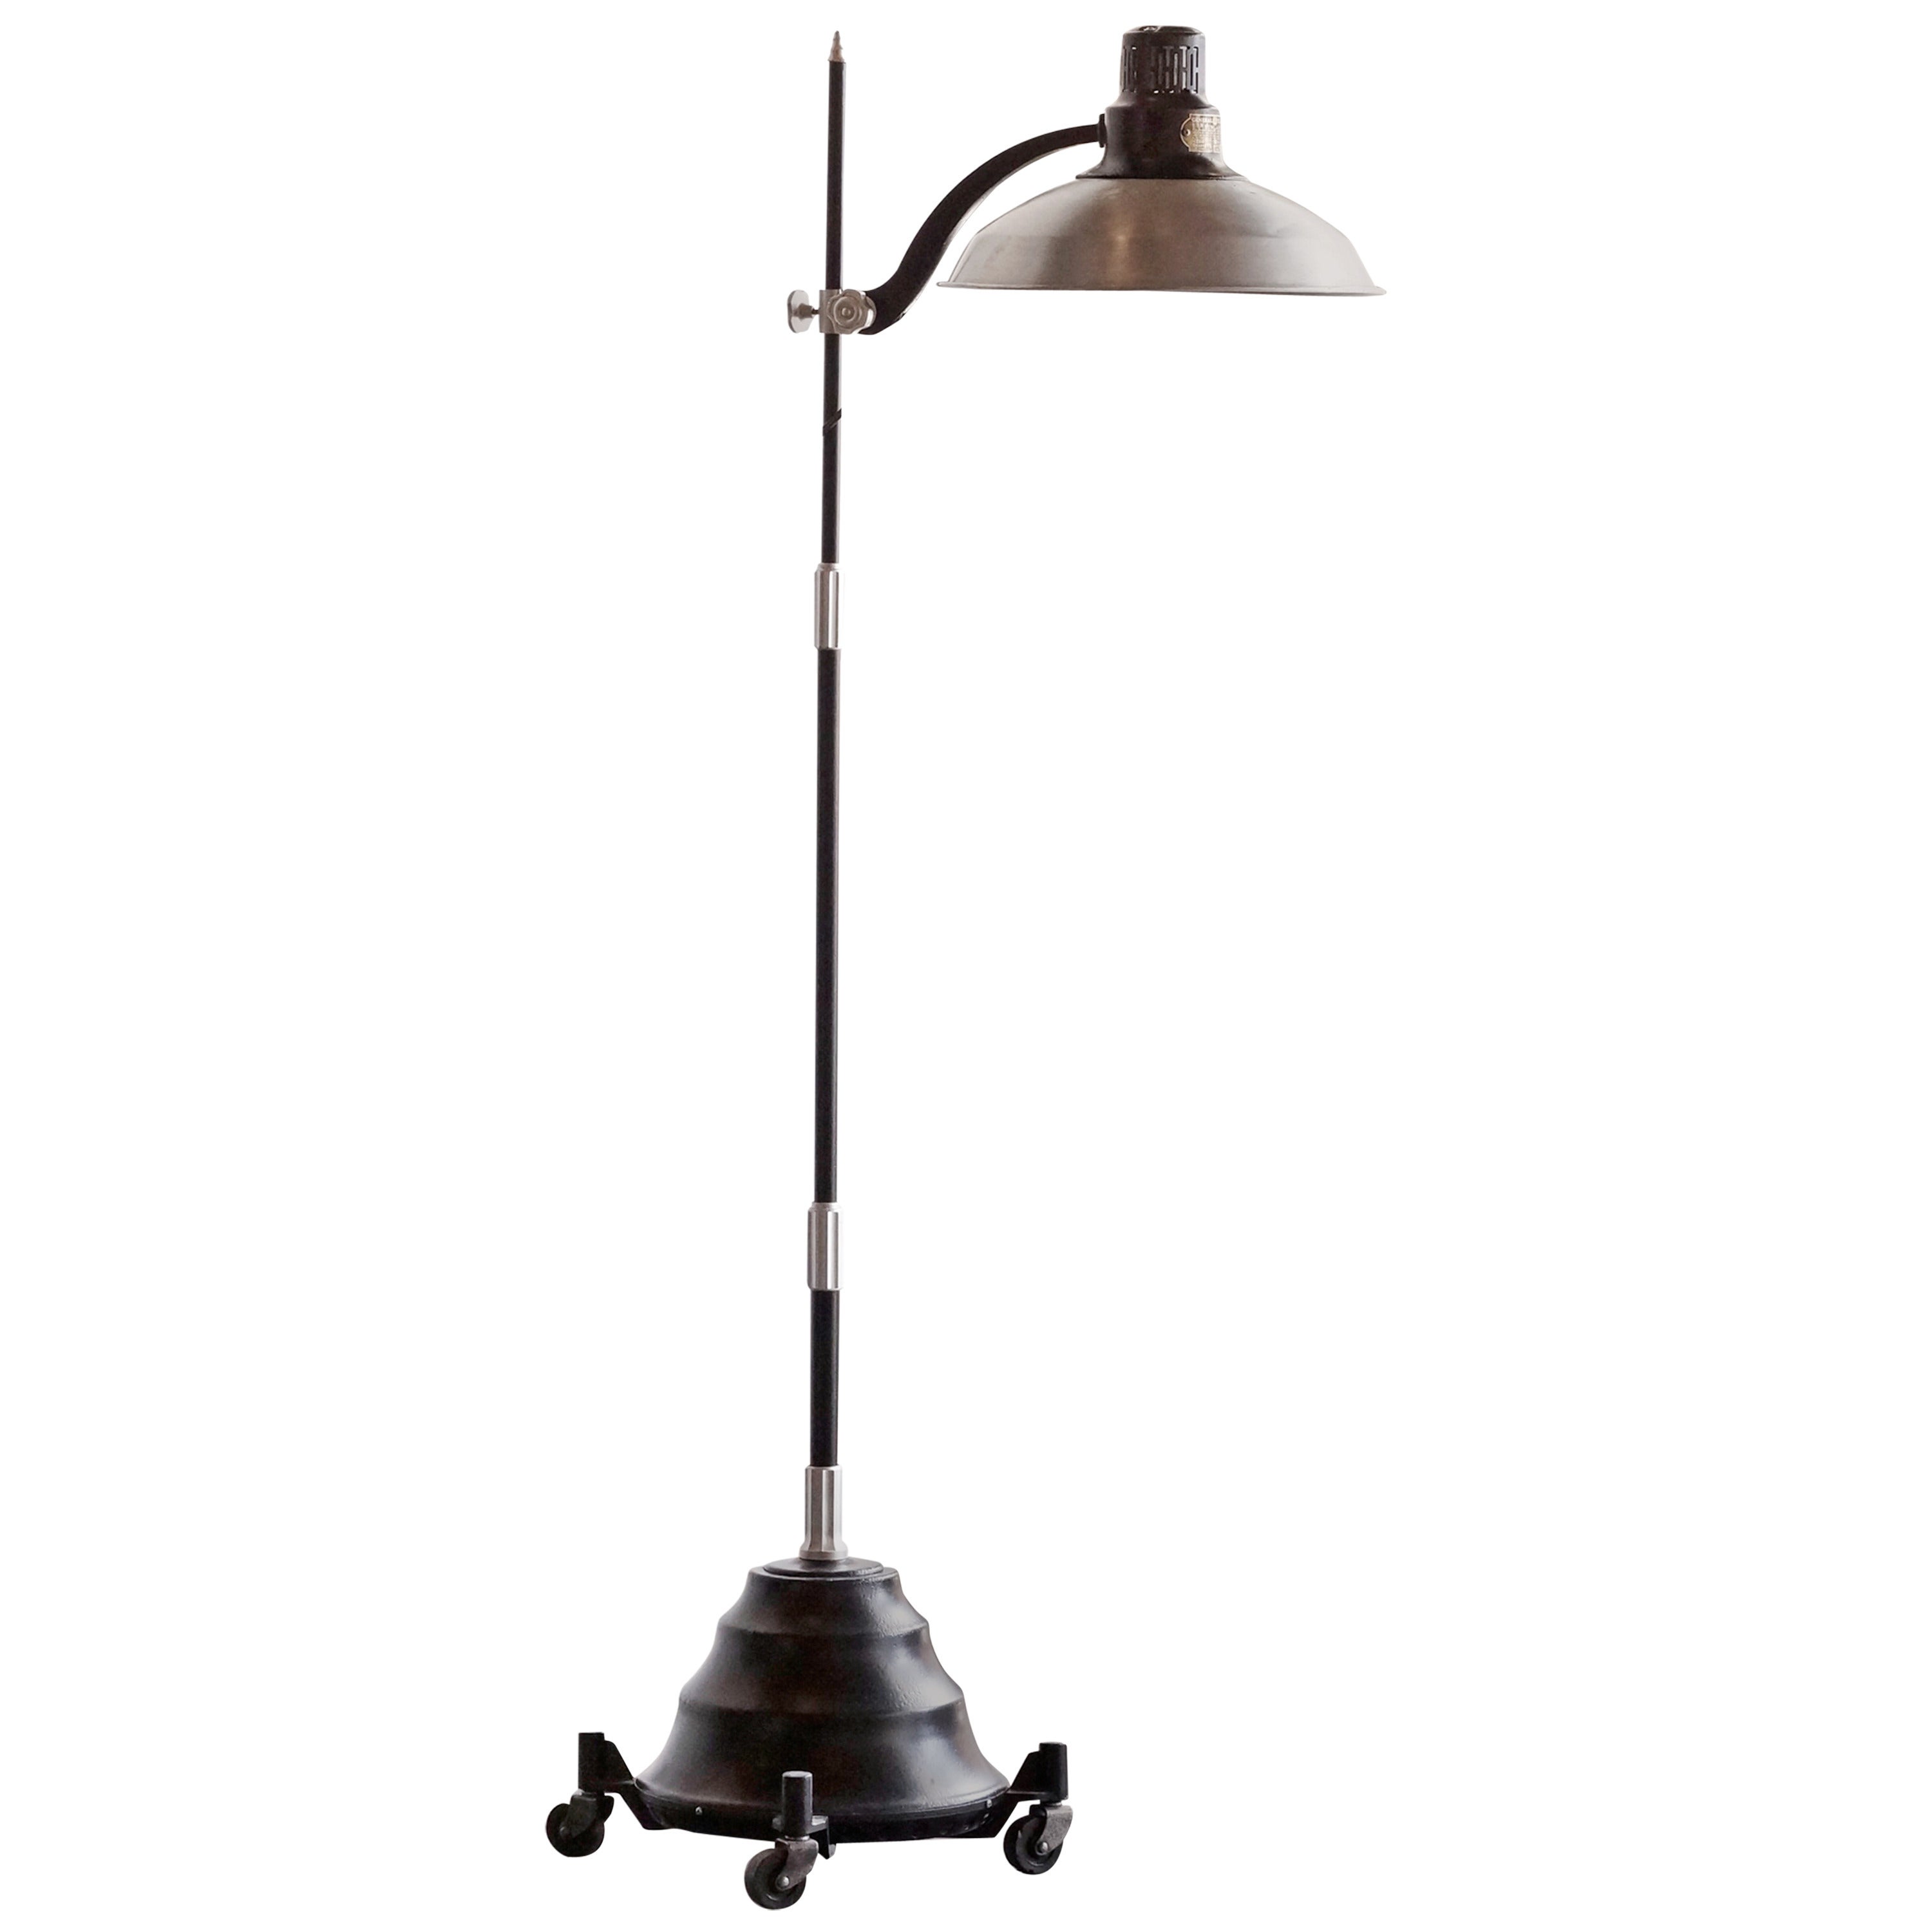 1920s General Electric Converted Sun Lamp as Floor Lamp, Refinished